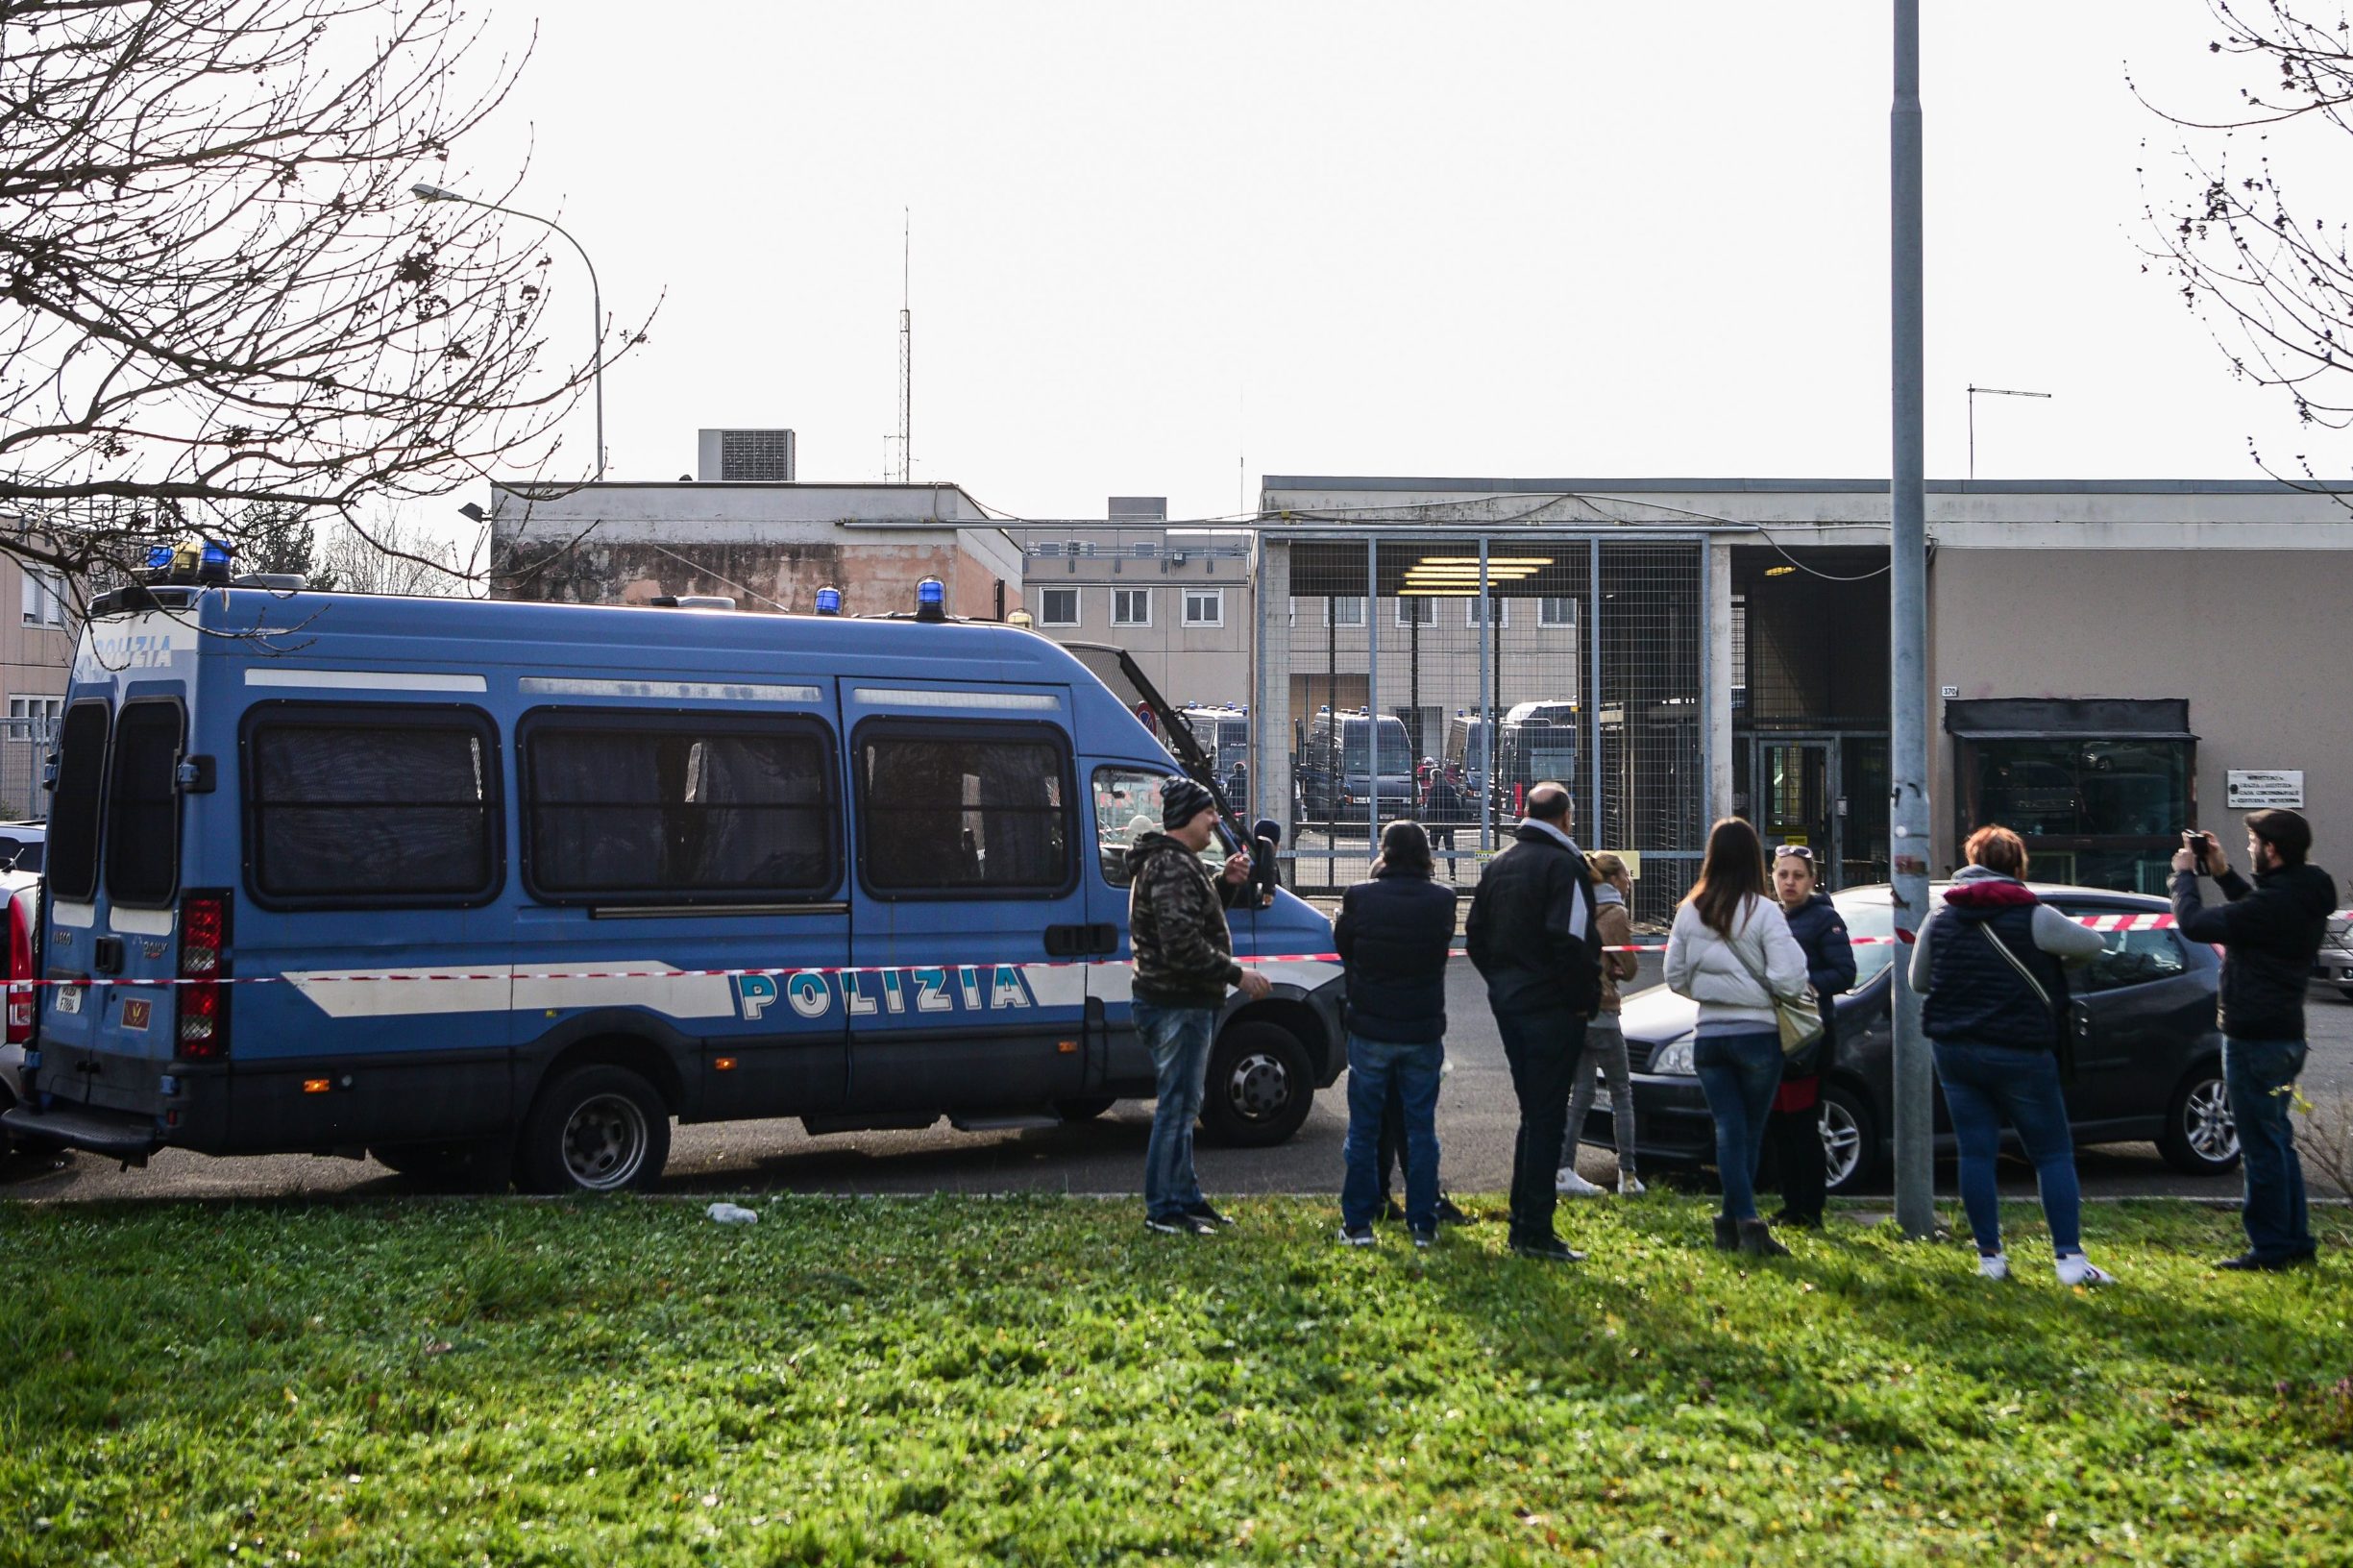 Relatives of inmates gather outside the SantAnna prison in Modena, Emilia-Romagna, in one of Italy's quarantine red zones on March 9, 2020. - Inmates in four Italian prisons have revolted over new rules introduced to contain the coronavirus outbreak, leaving one prisoner dead and others injured, a prison rights group said on March 8. Prisoners at jails in Naples Poggioreale in the south, Modena in the north, Frosinone in central Italy and at Alexandria in the northwest had all revolted over measures including a ban on family visits, unions said. (Photo by Piero CRUCIATTI / AFP)